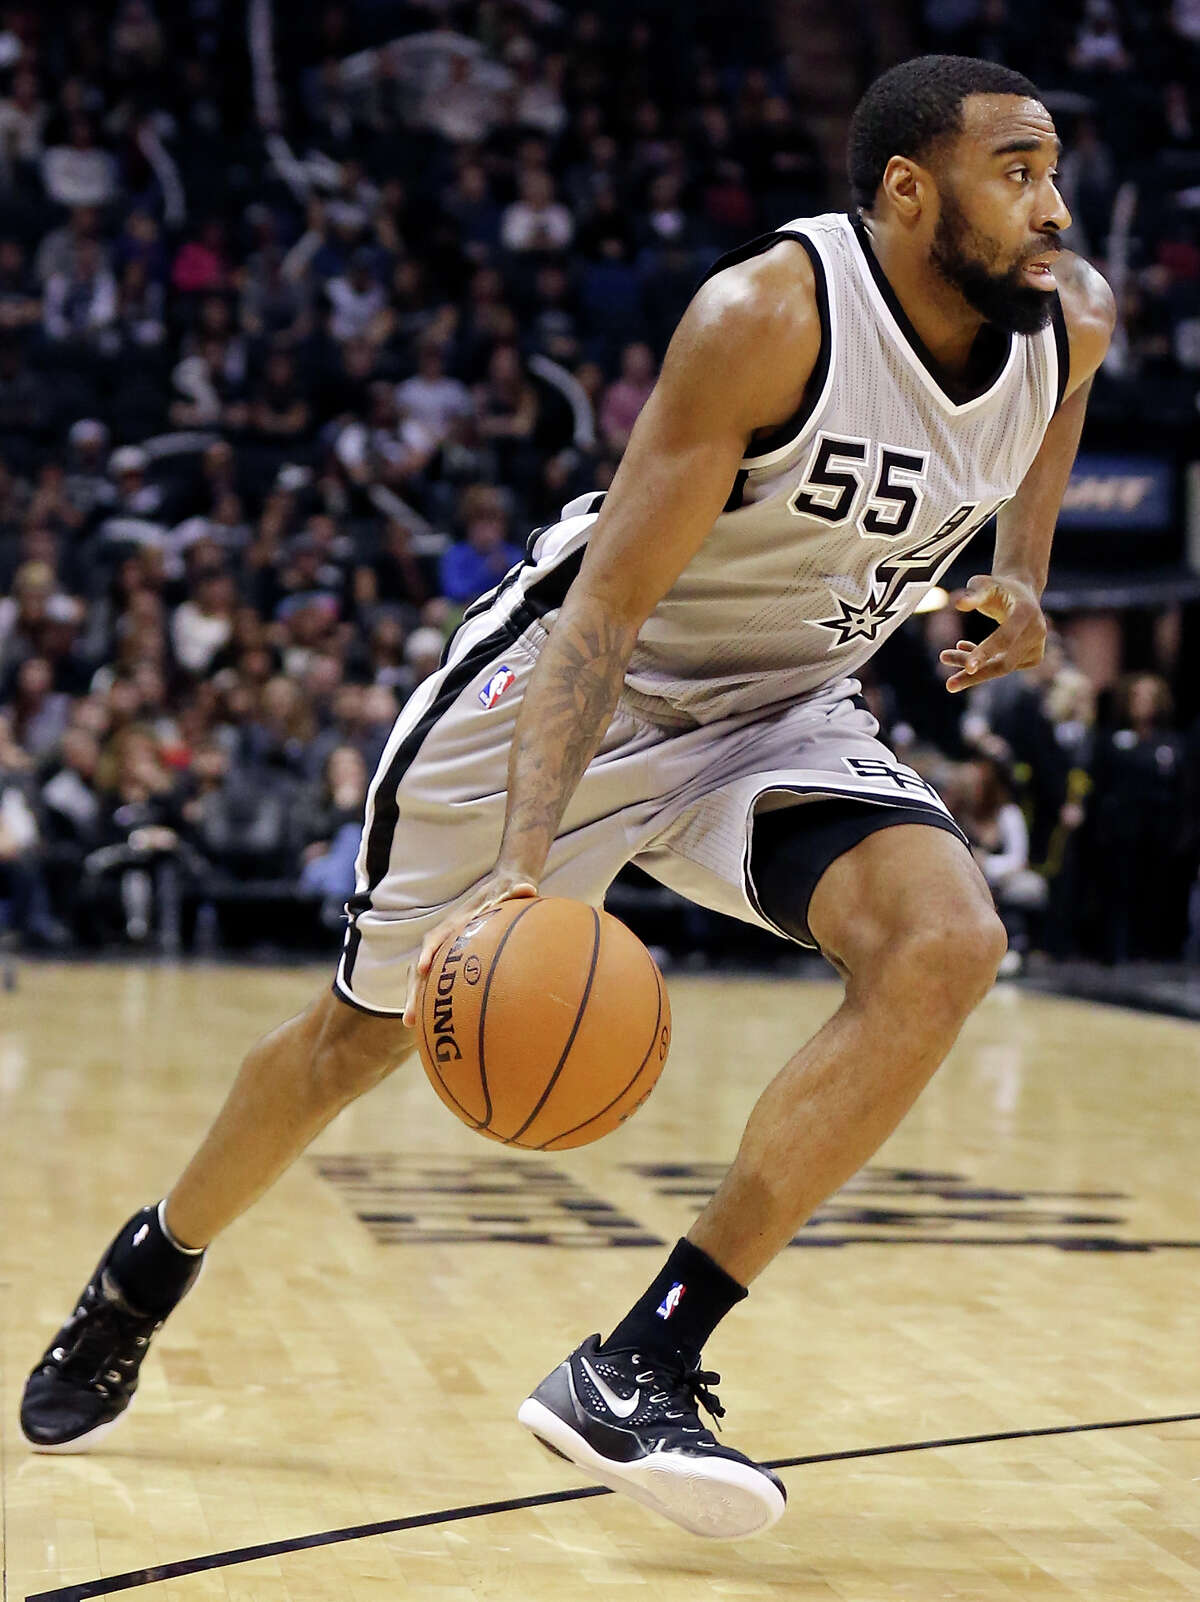 San Antonio Spurs' Reggie Williams heads up court against the Los Angeles Clippers during second half action Saturday Jan. 31, 2015 at the AT&T Center. The Clippers won 105-85.